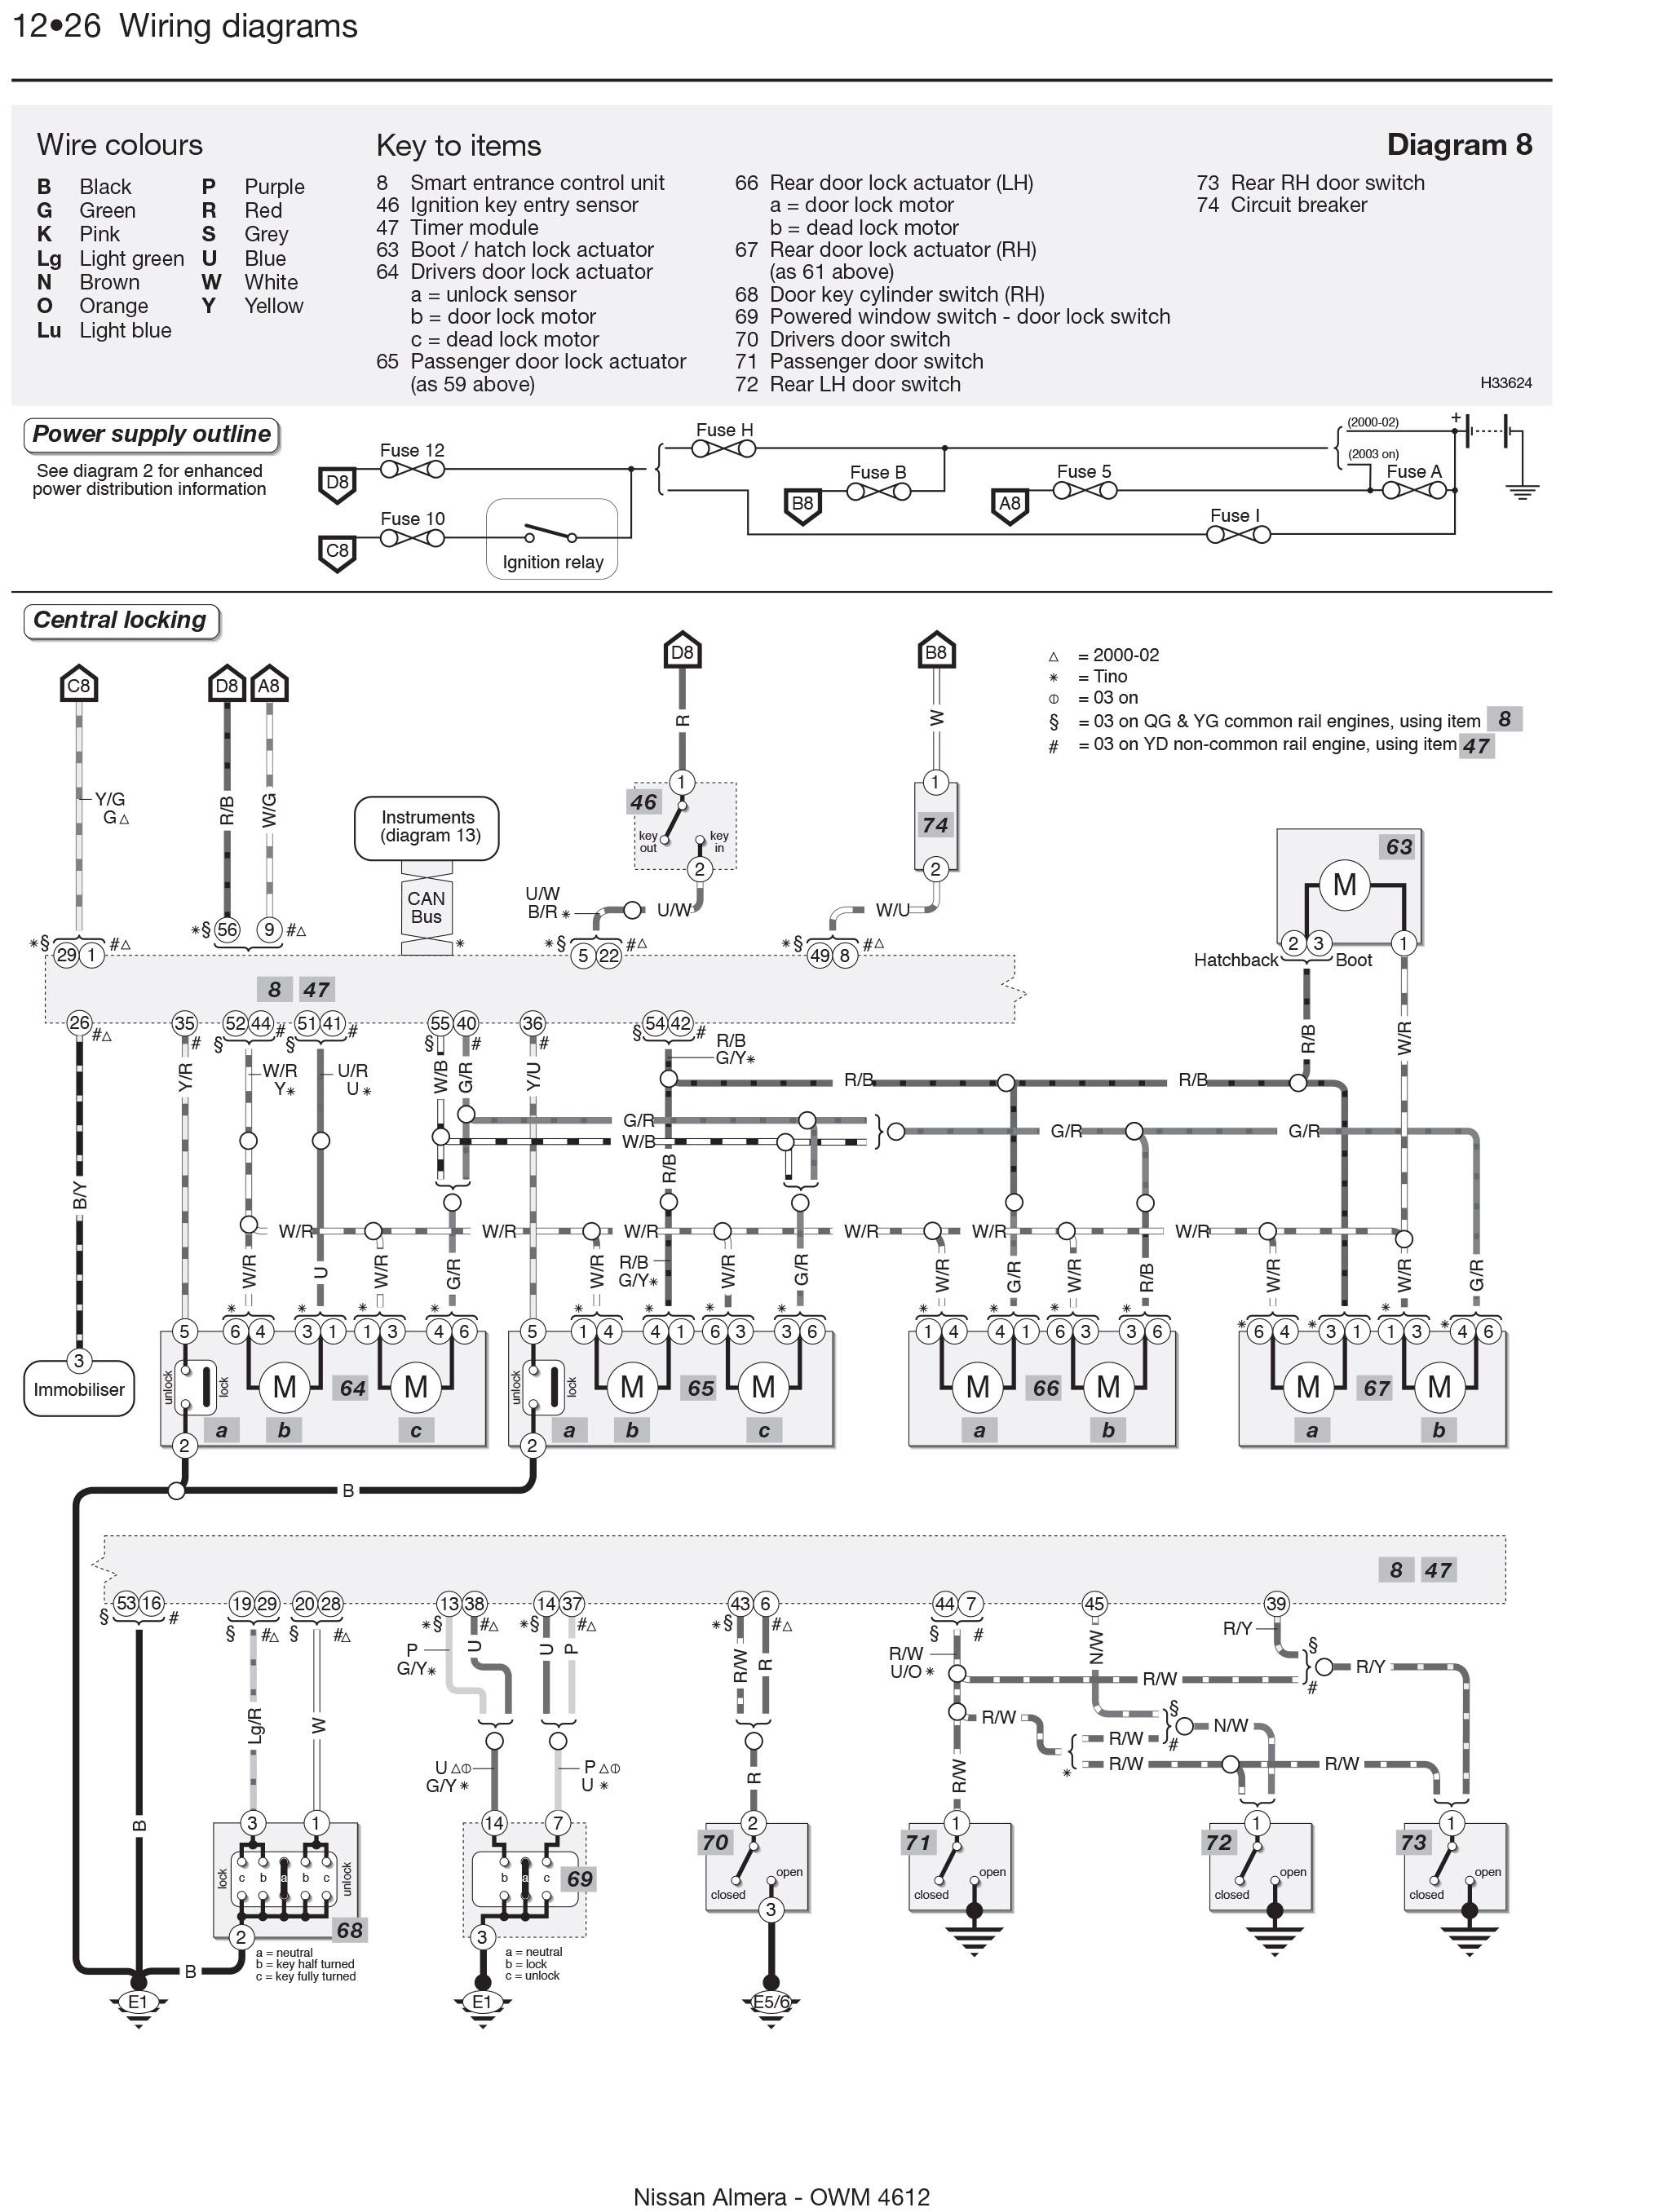 Wiring Diagram Nissan Almera from d32ptomnhiuevv.cloudfront.net